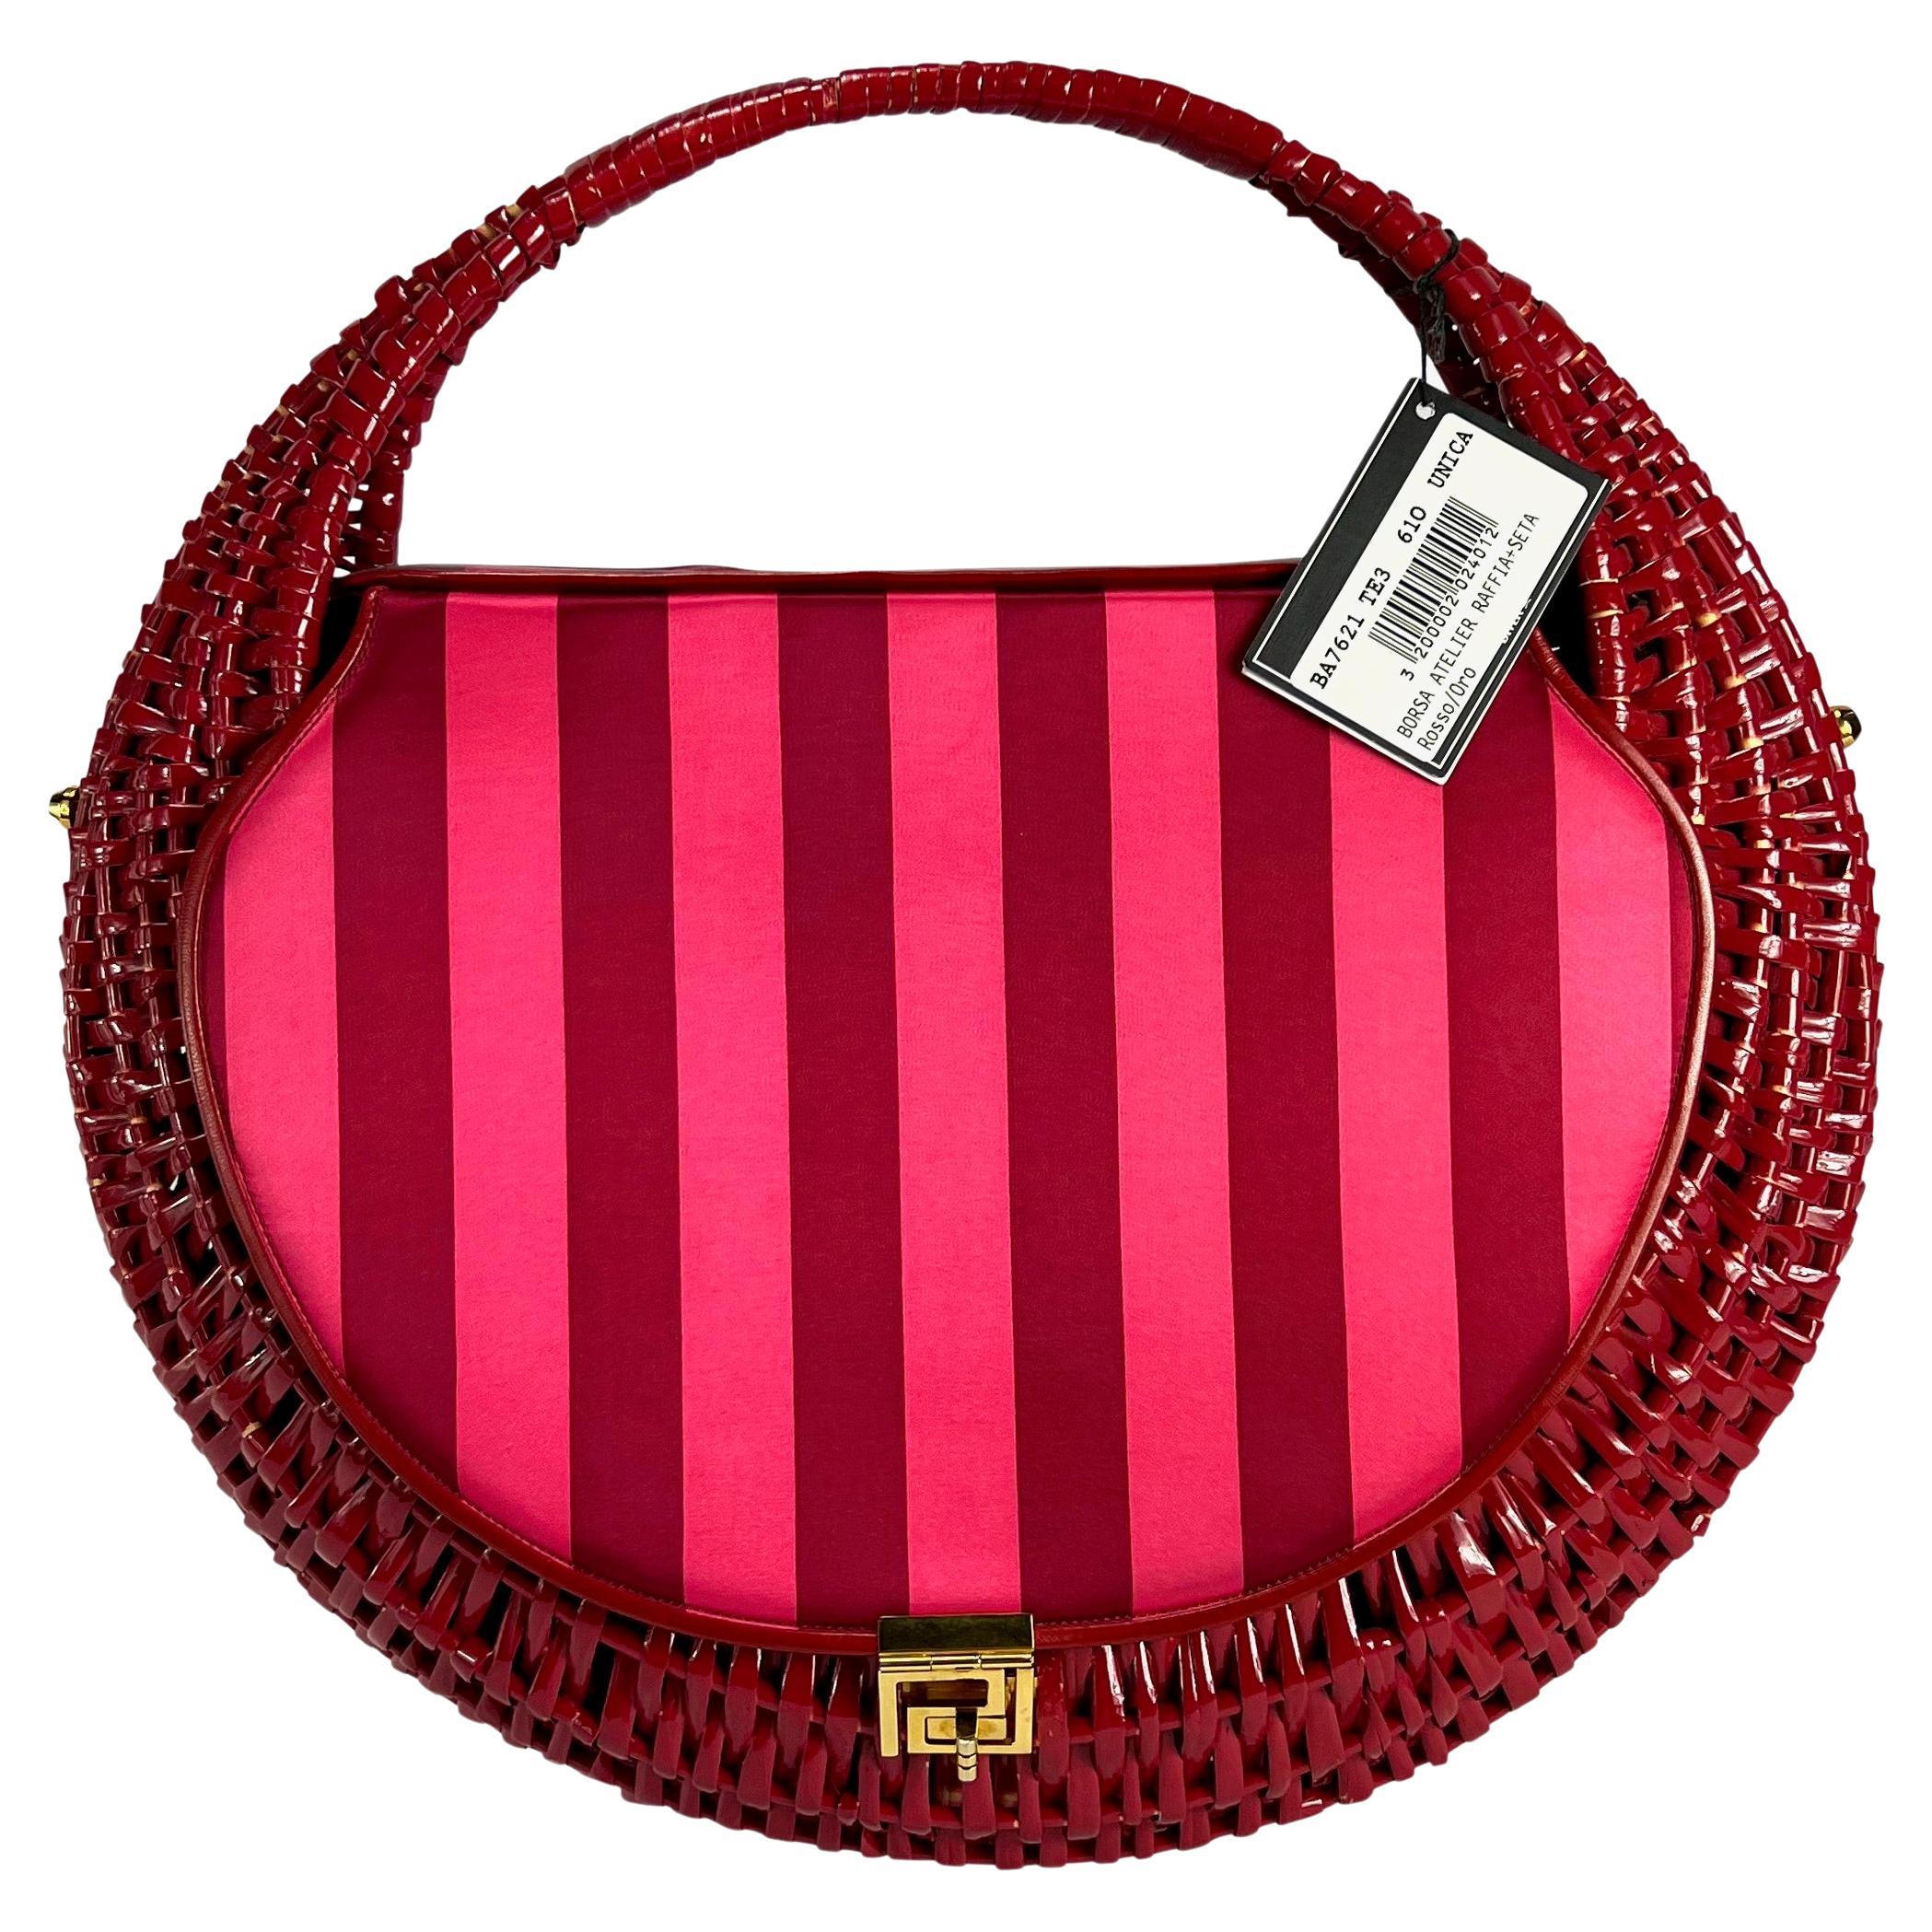 Women's NWT S/S 2001 Atelier Versace by Donatella Versace Pink Satin and Wicker Bag For Sale